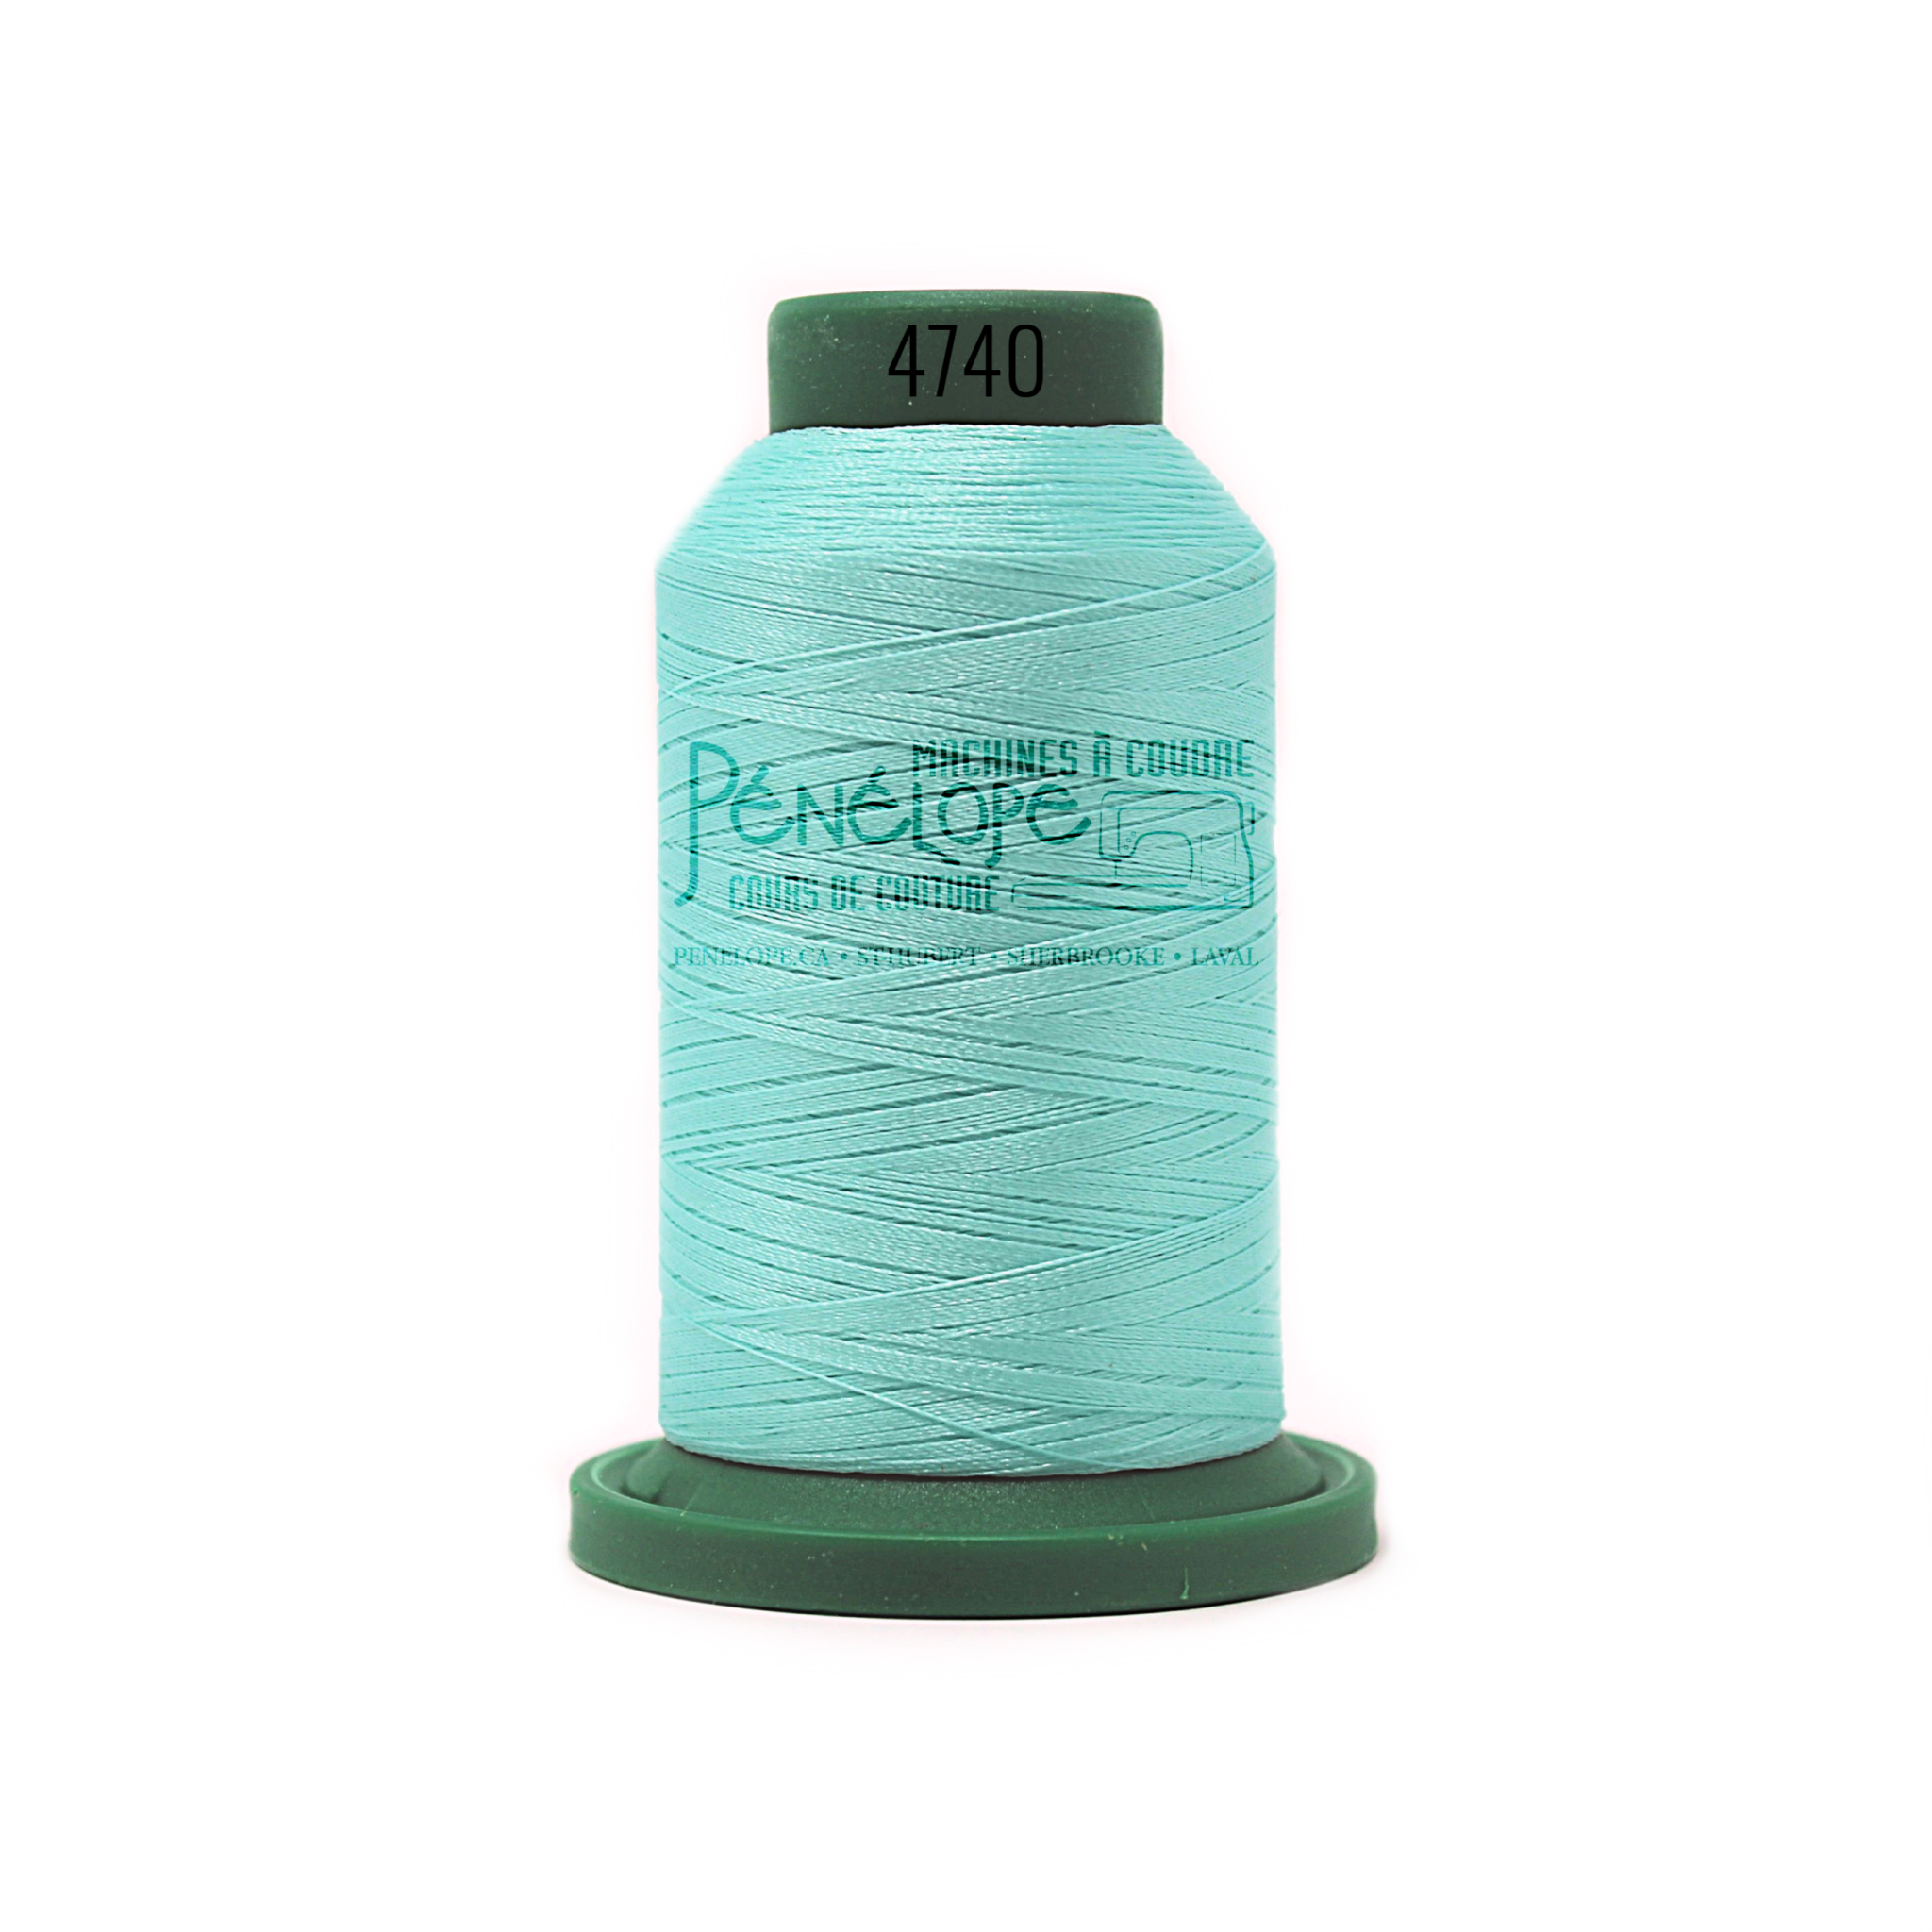 Isacord Isacord sewing and embroidery thread 4740